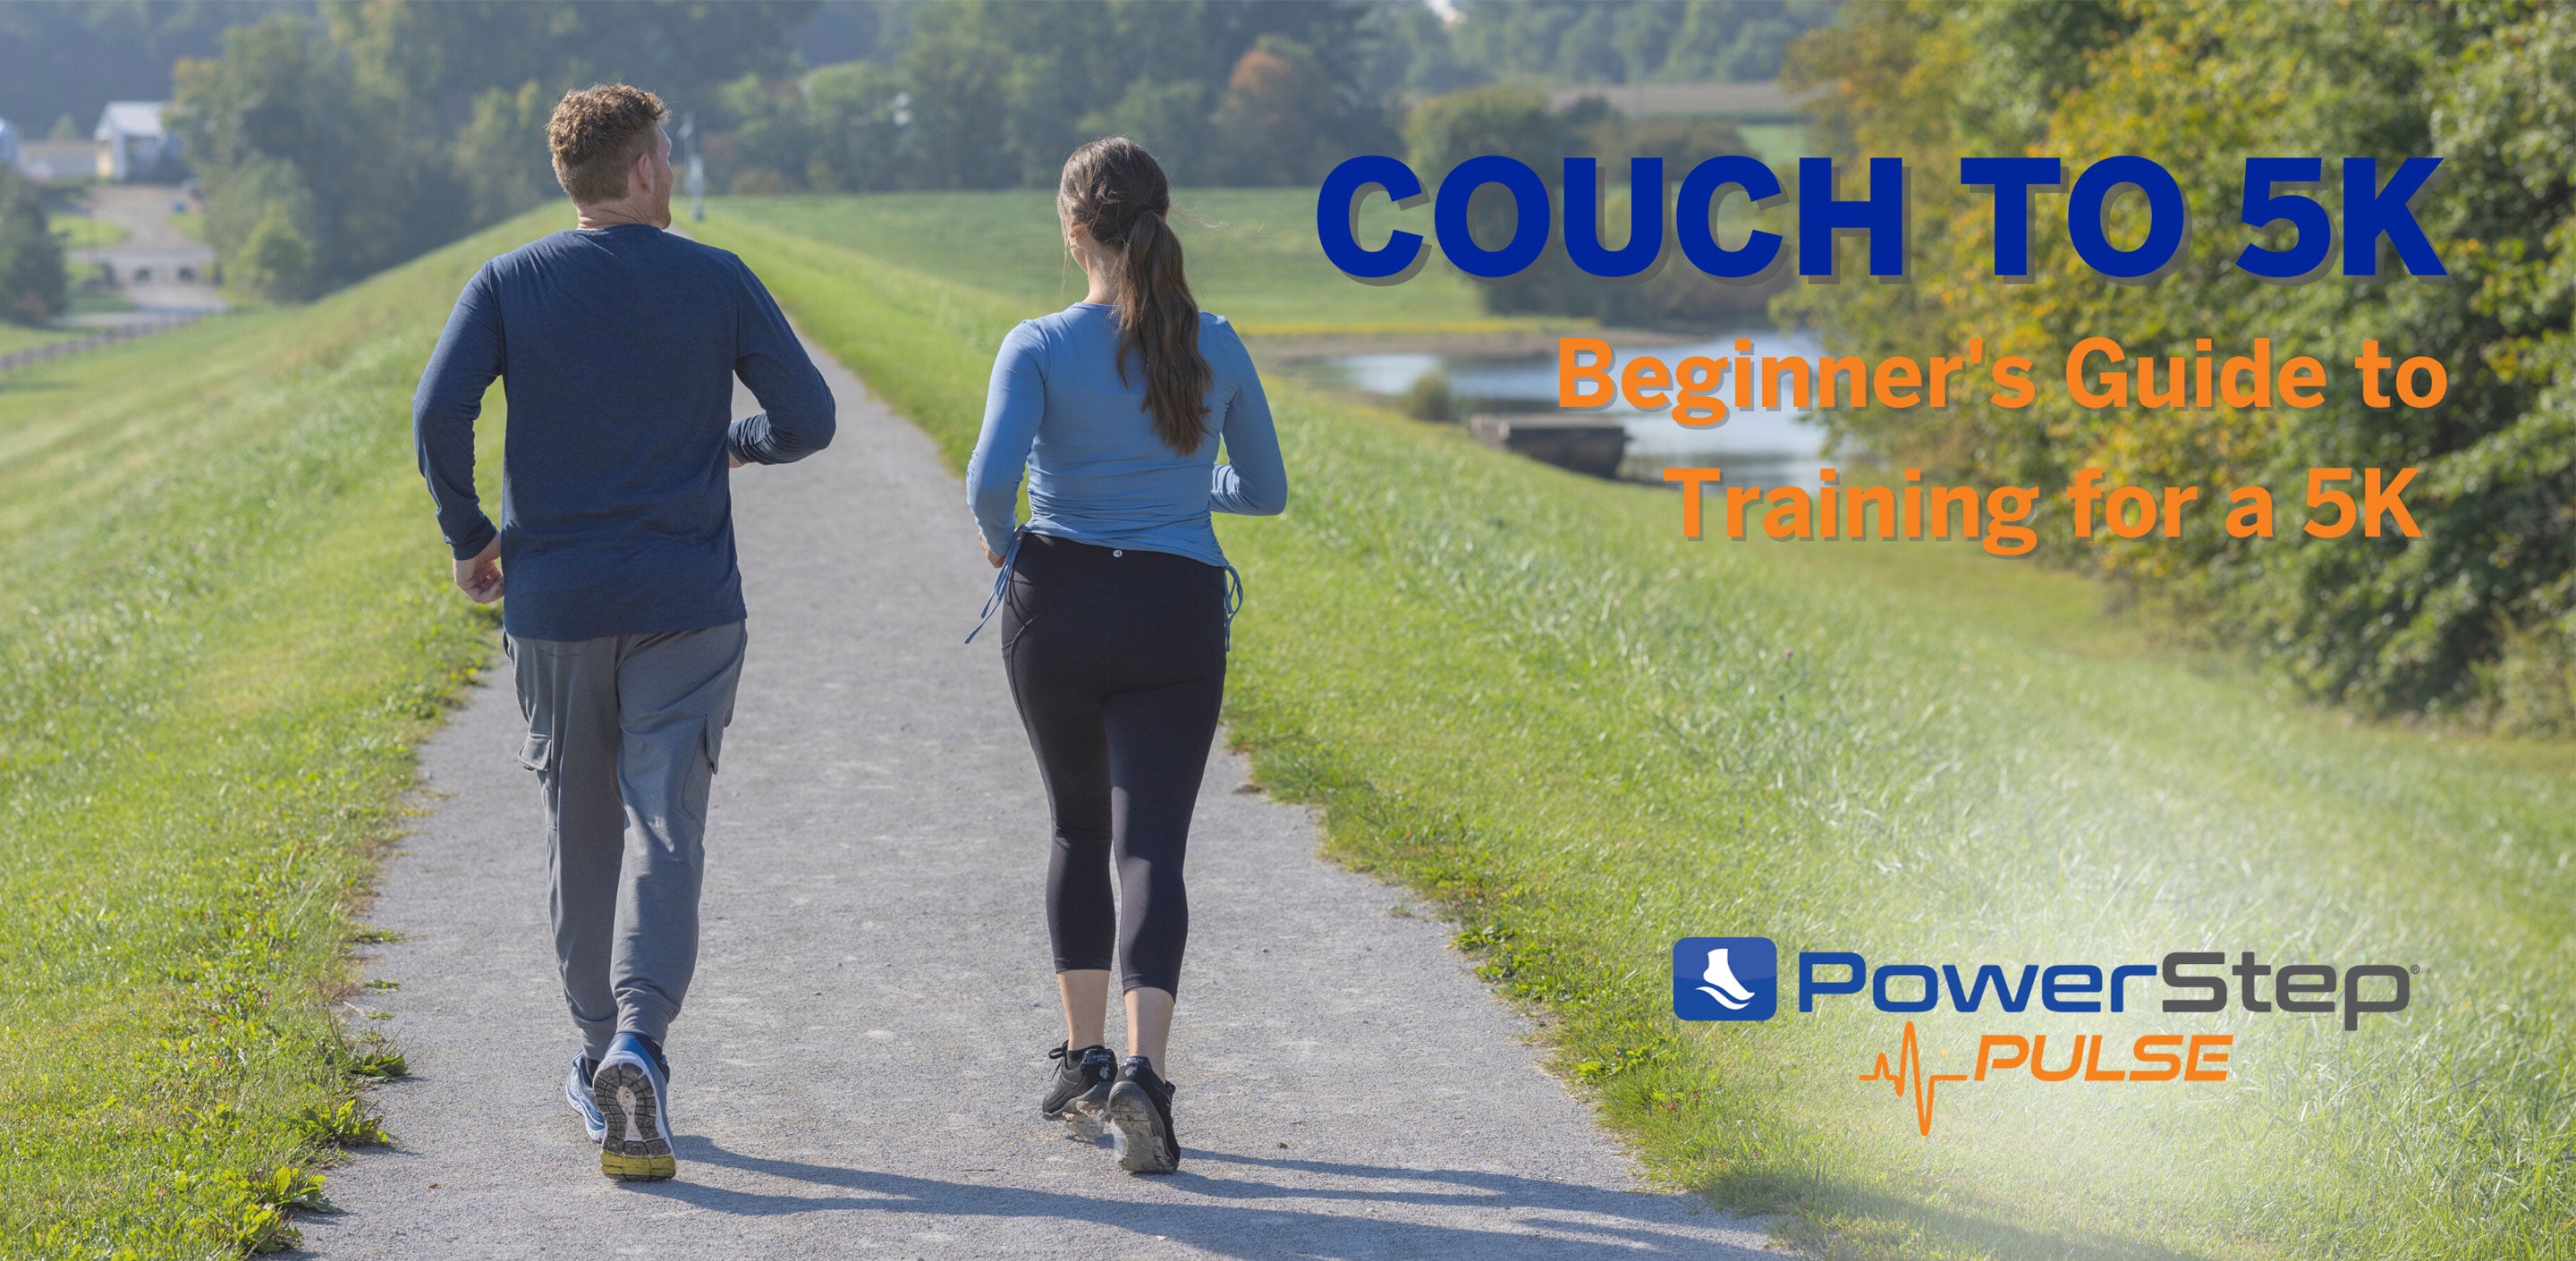 The jogging guide for beginners and new runners - Jogging-Course